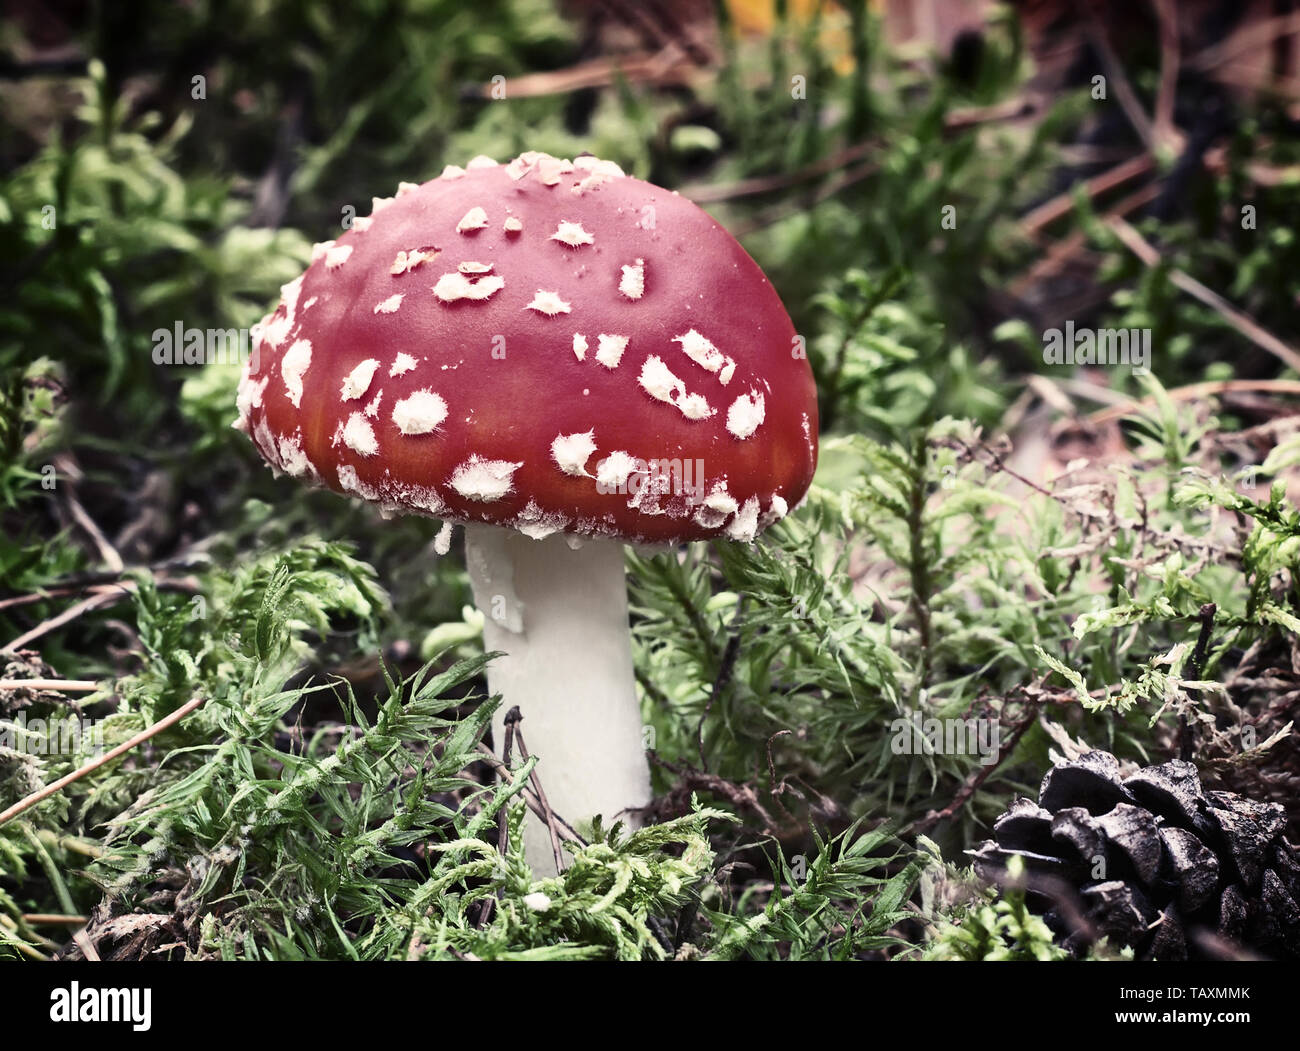 Among the green moss and fallen leaves grows poisonous mushroom mushroom fly agaric with a beautiful red hat. Stock Photo